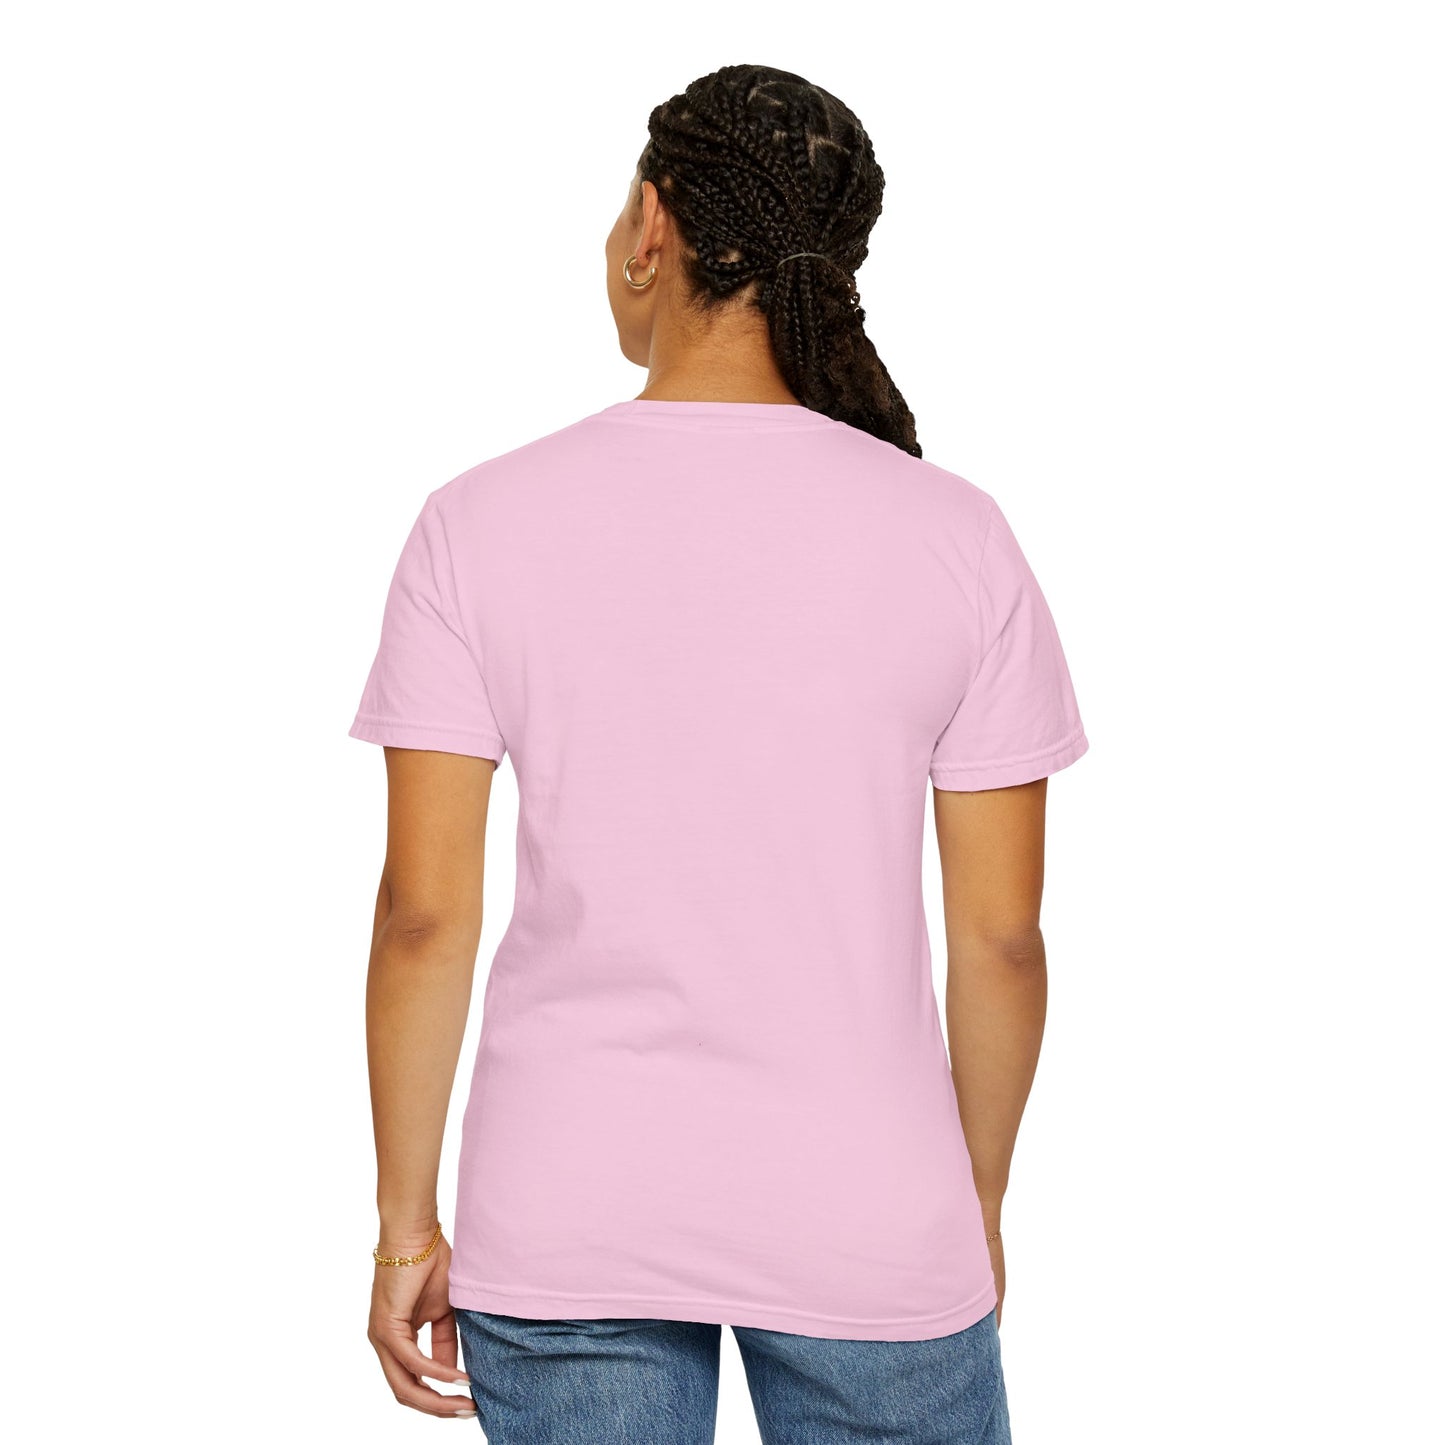 Why risk of not going fishing: Unisex Garment-Dyed T-shirt